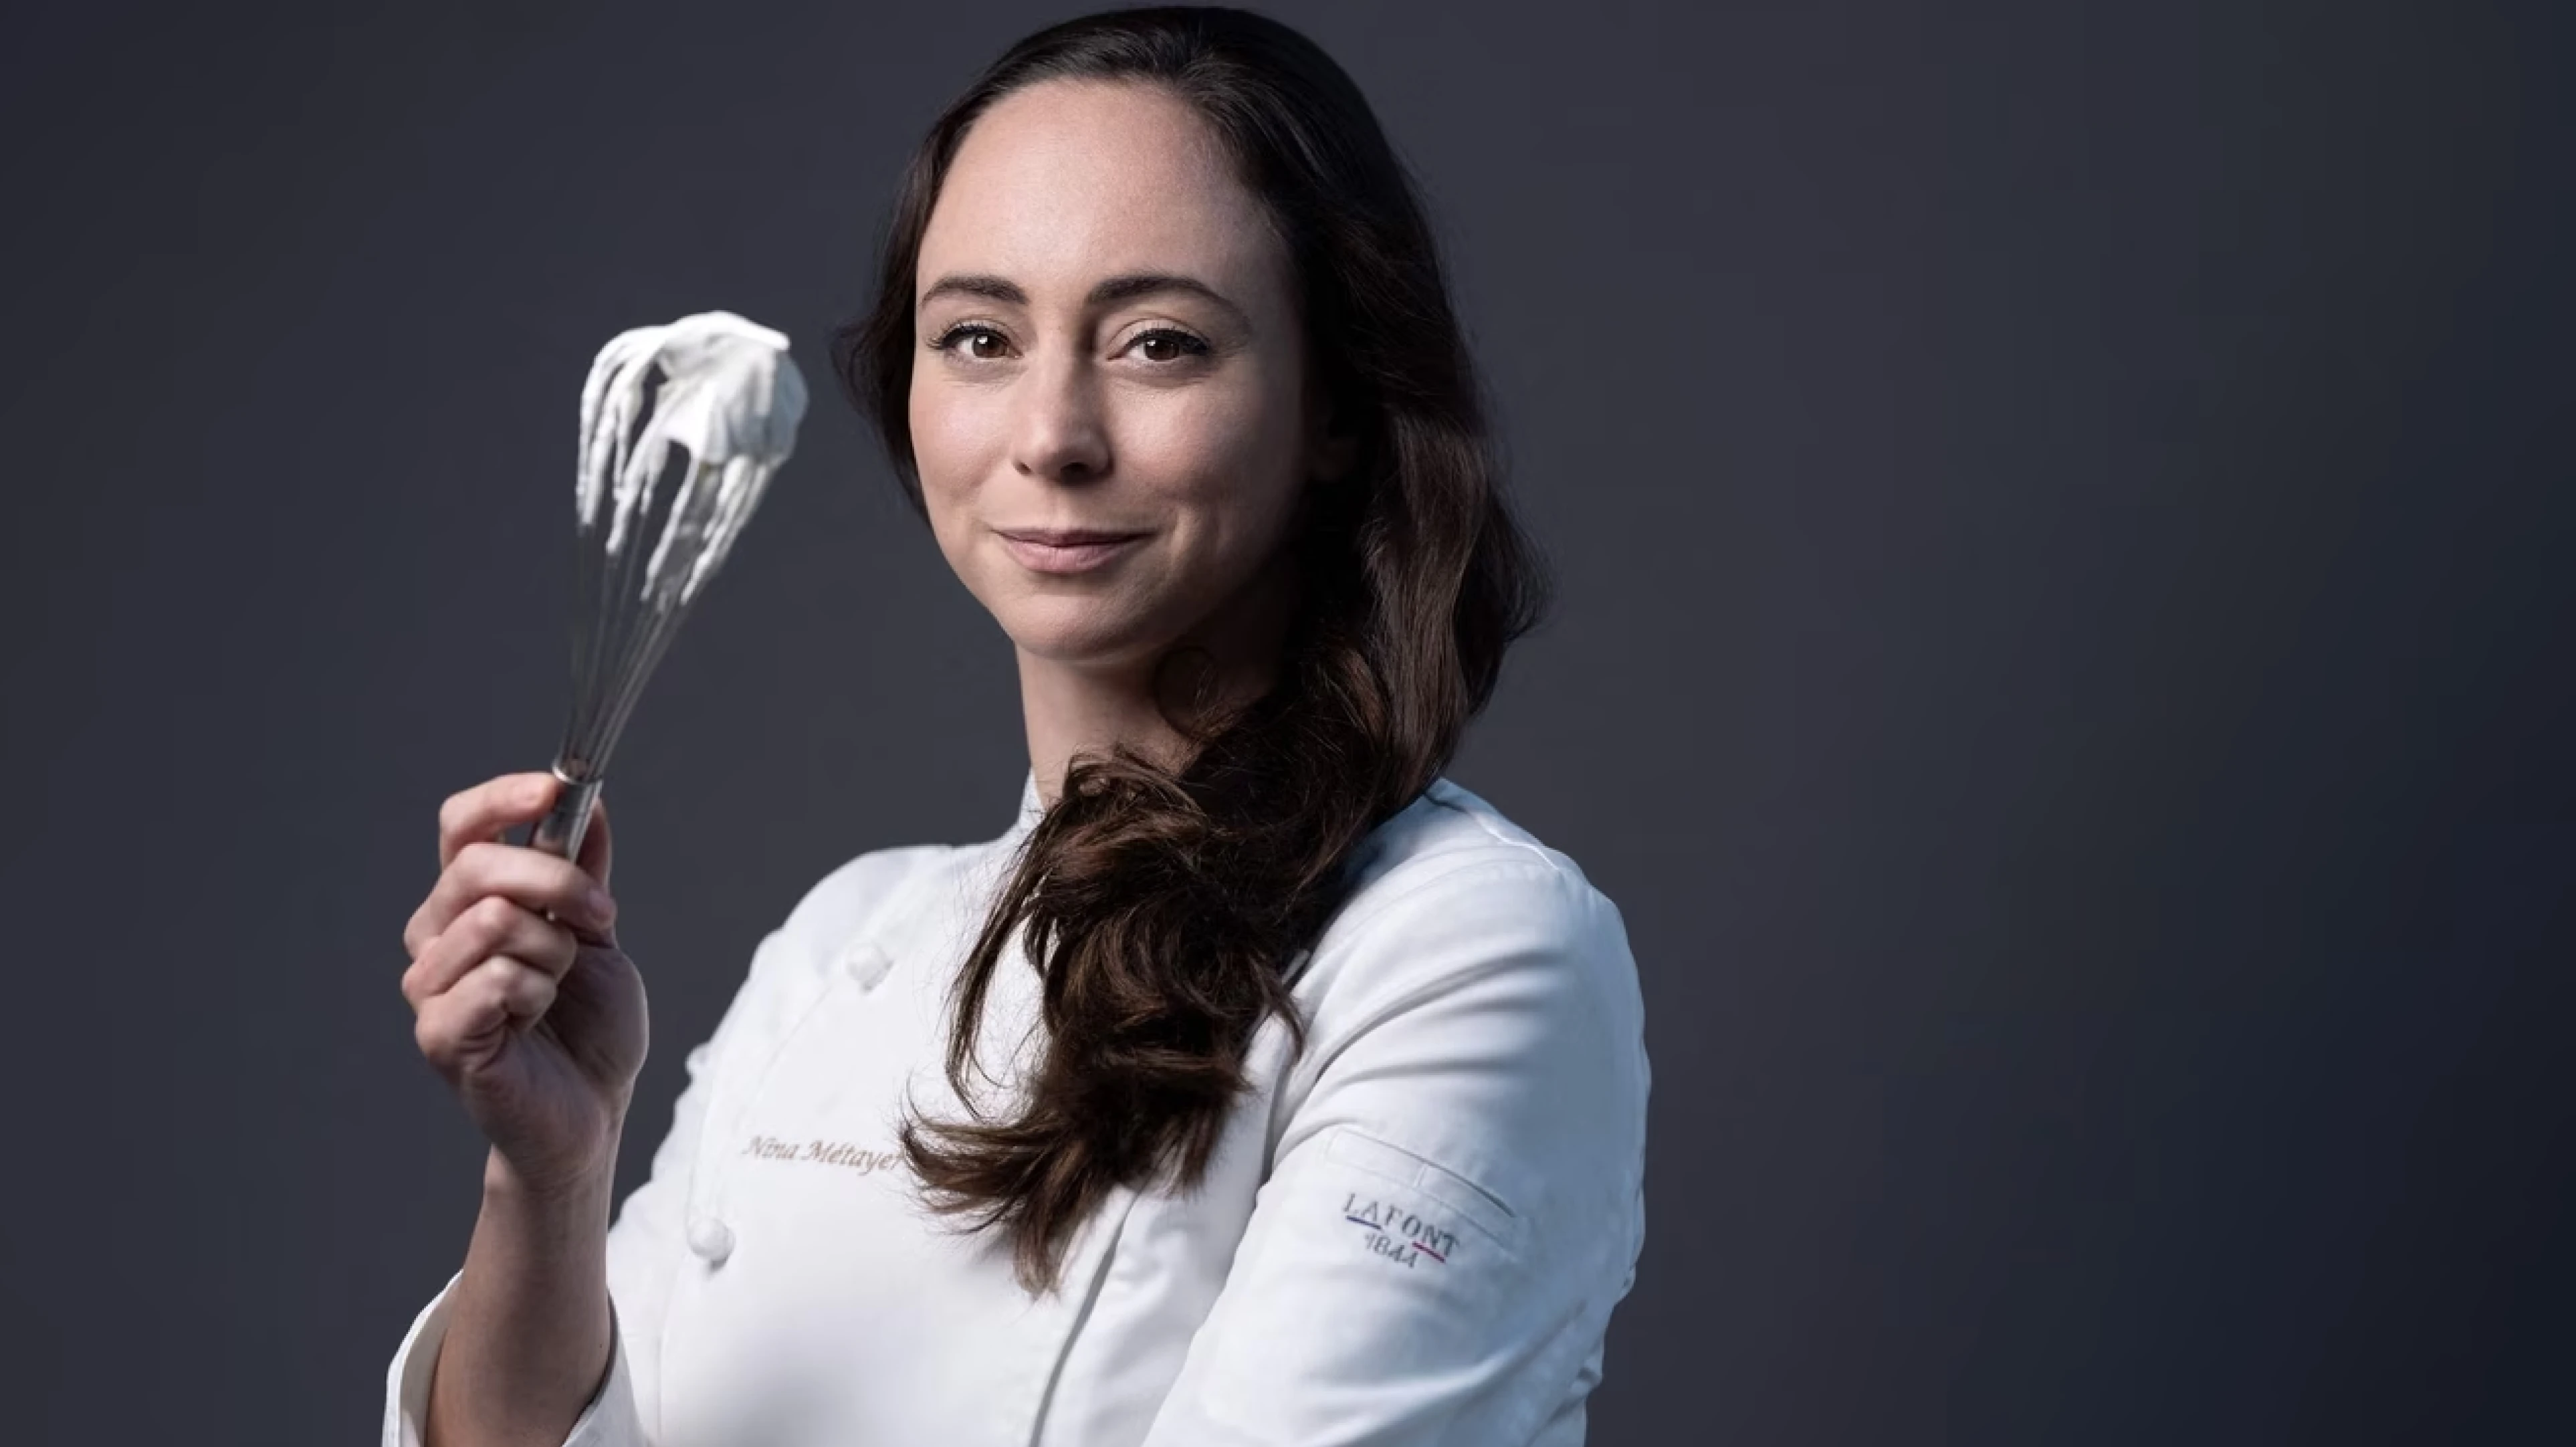 Nina Métayer Receives the Title of World's Best Pastry Chef for 2023